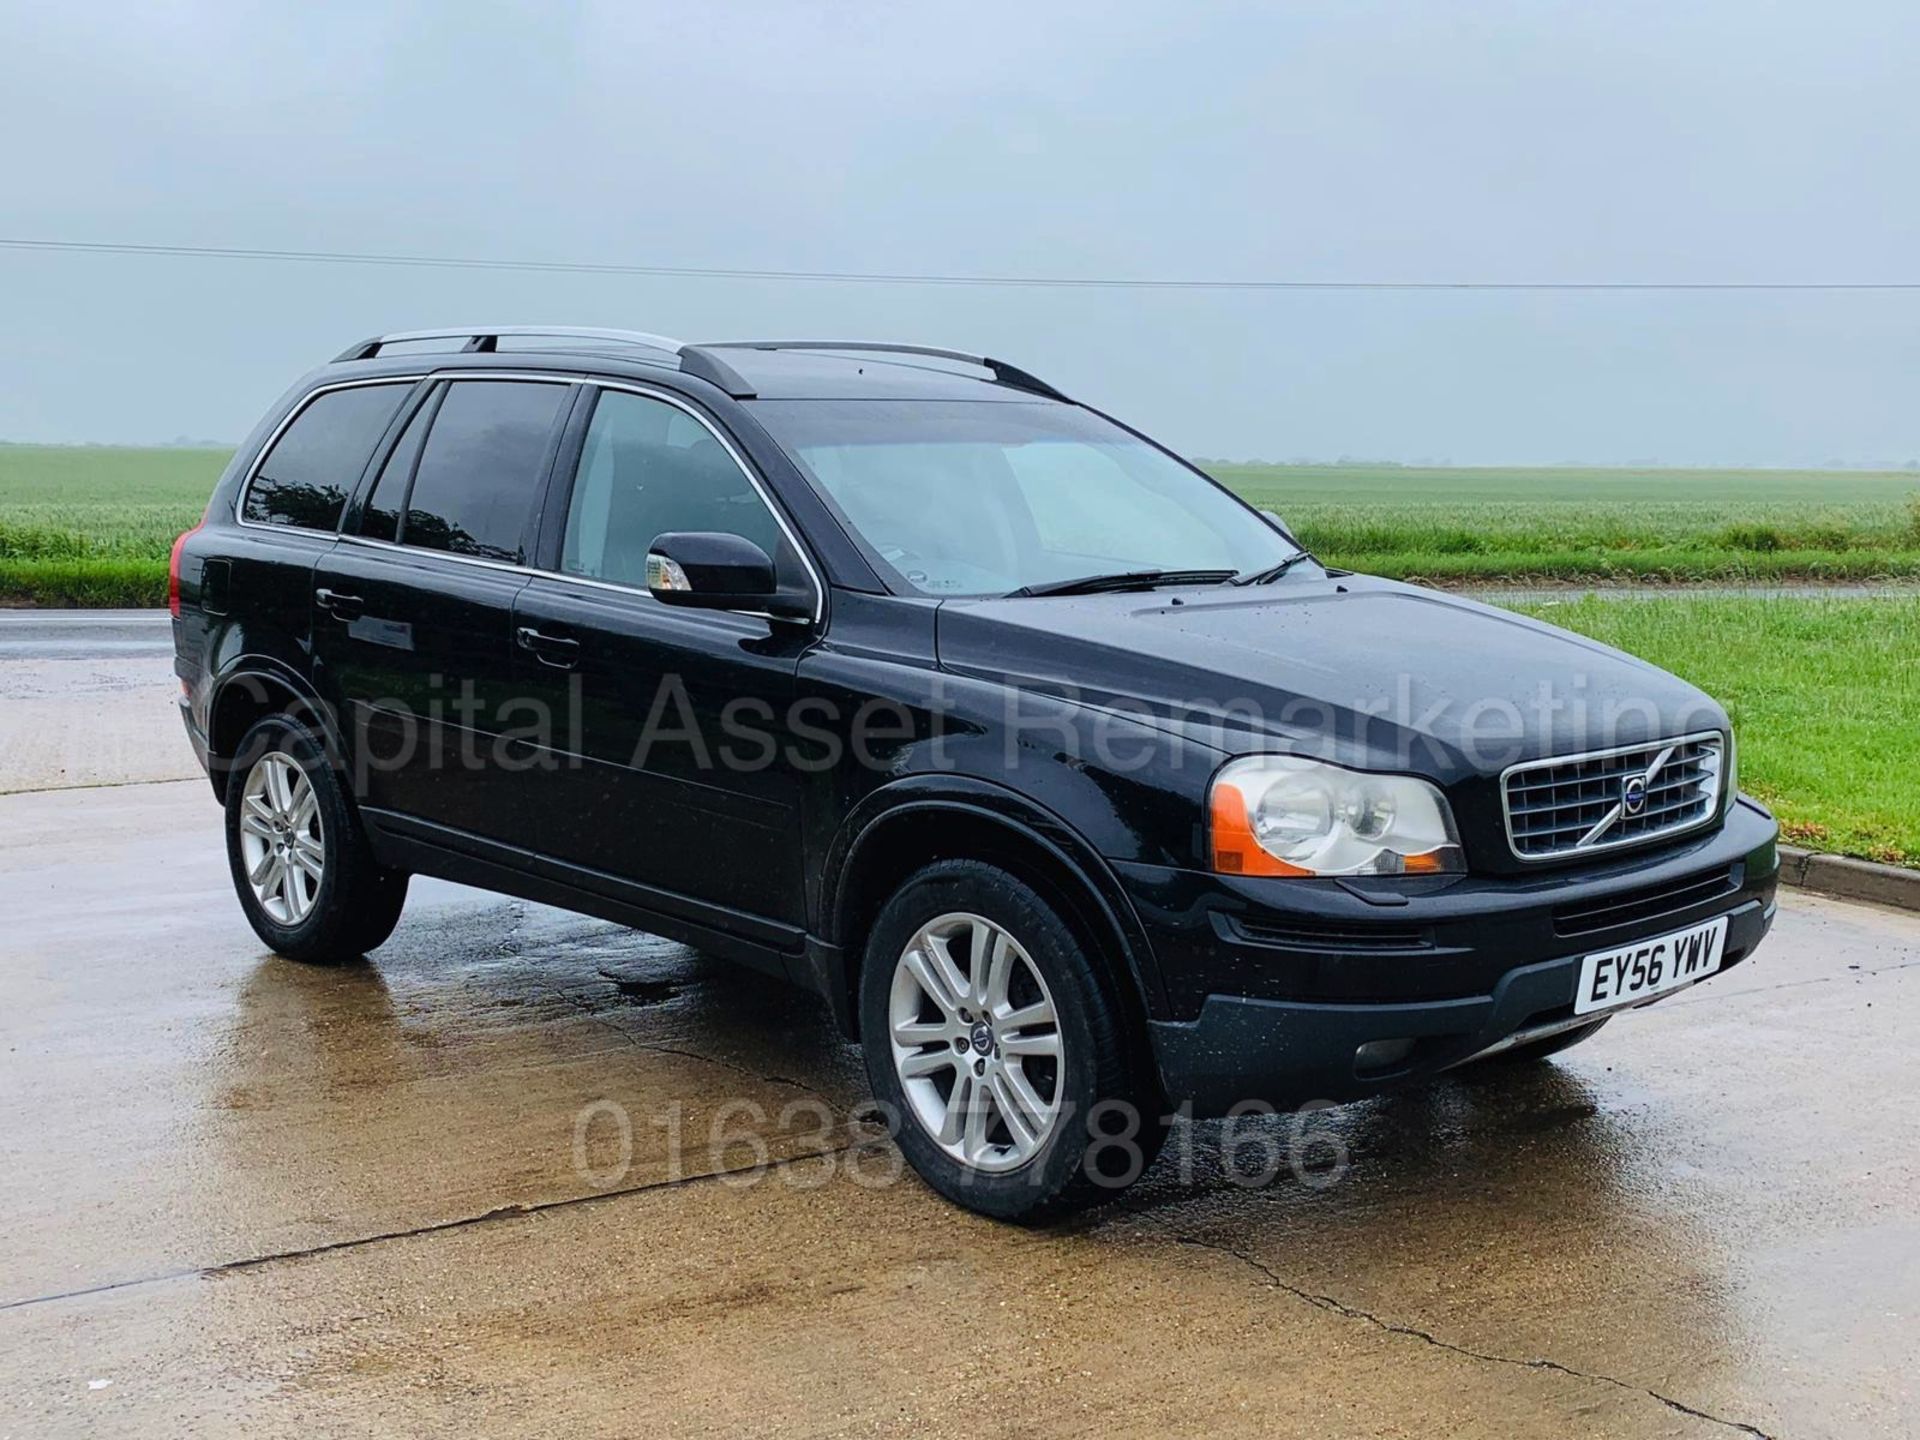 VOLVO XC90 *SE LUX - EDITION* 7 SEATER SUV (2007 MODEL) '2.4 DIESEL - 185 BHP - AUTO' *FULLY LOADED*